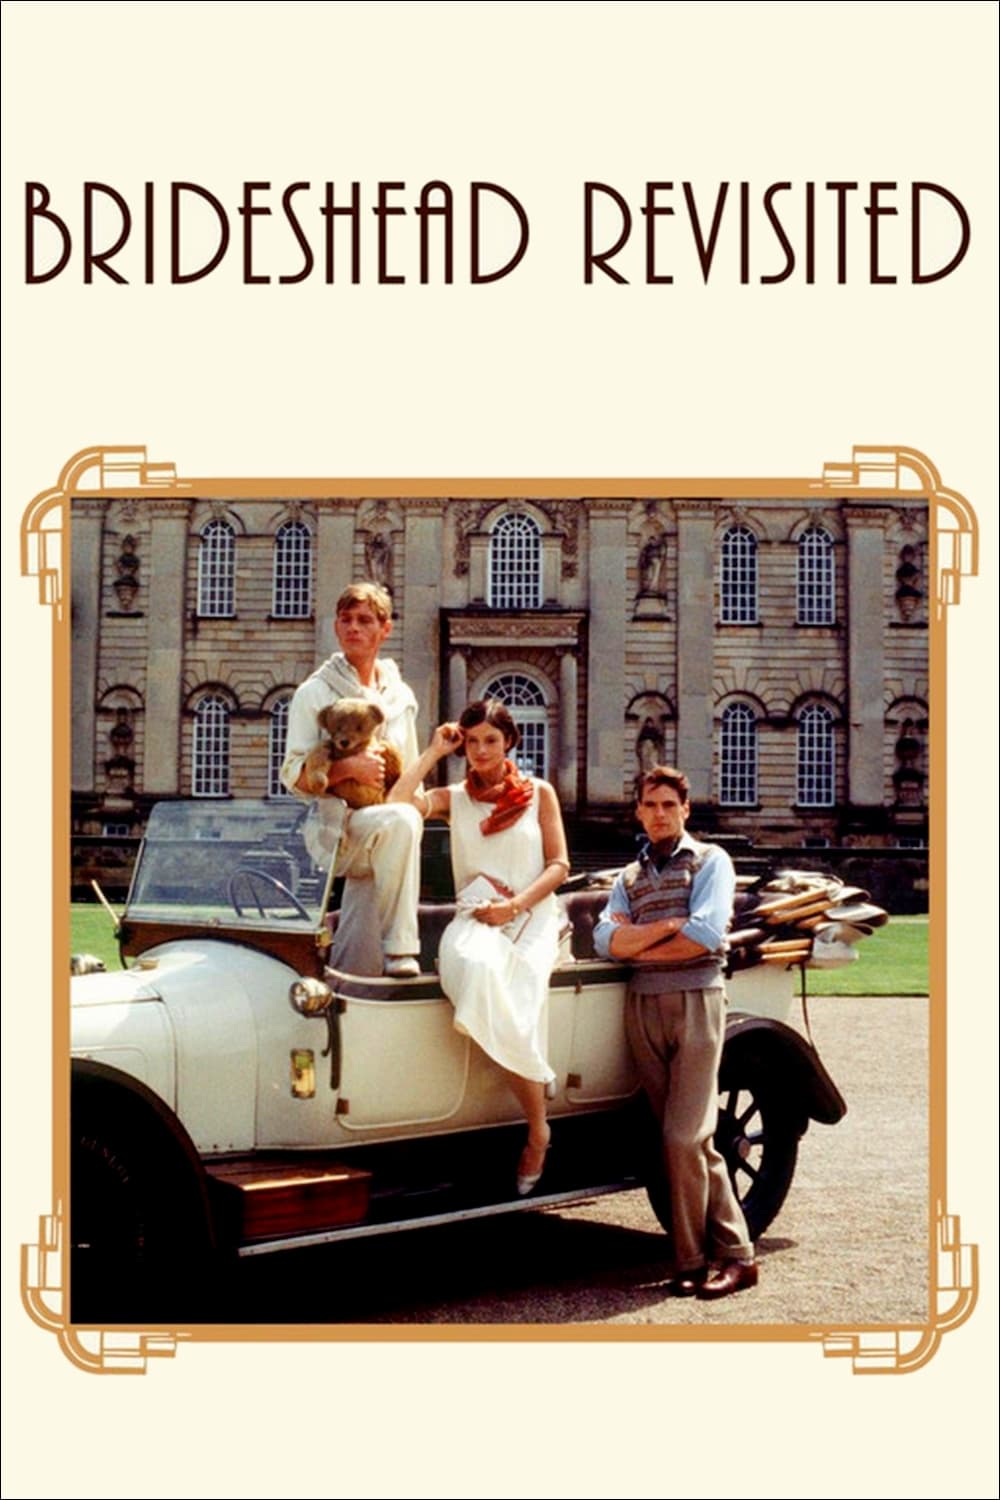 Brideshead Revisited TV Shows About Catholicism